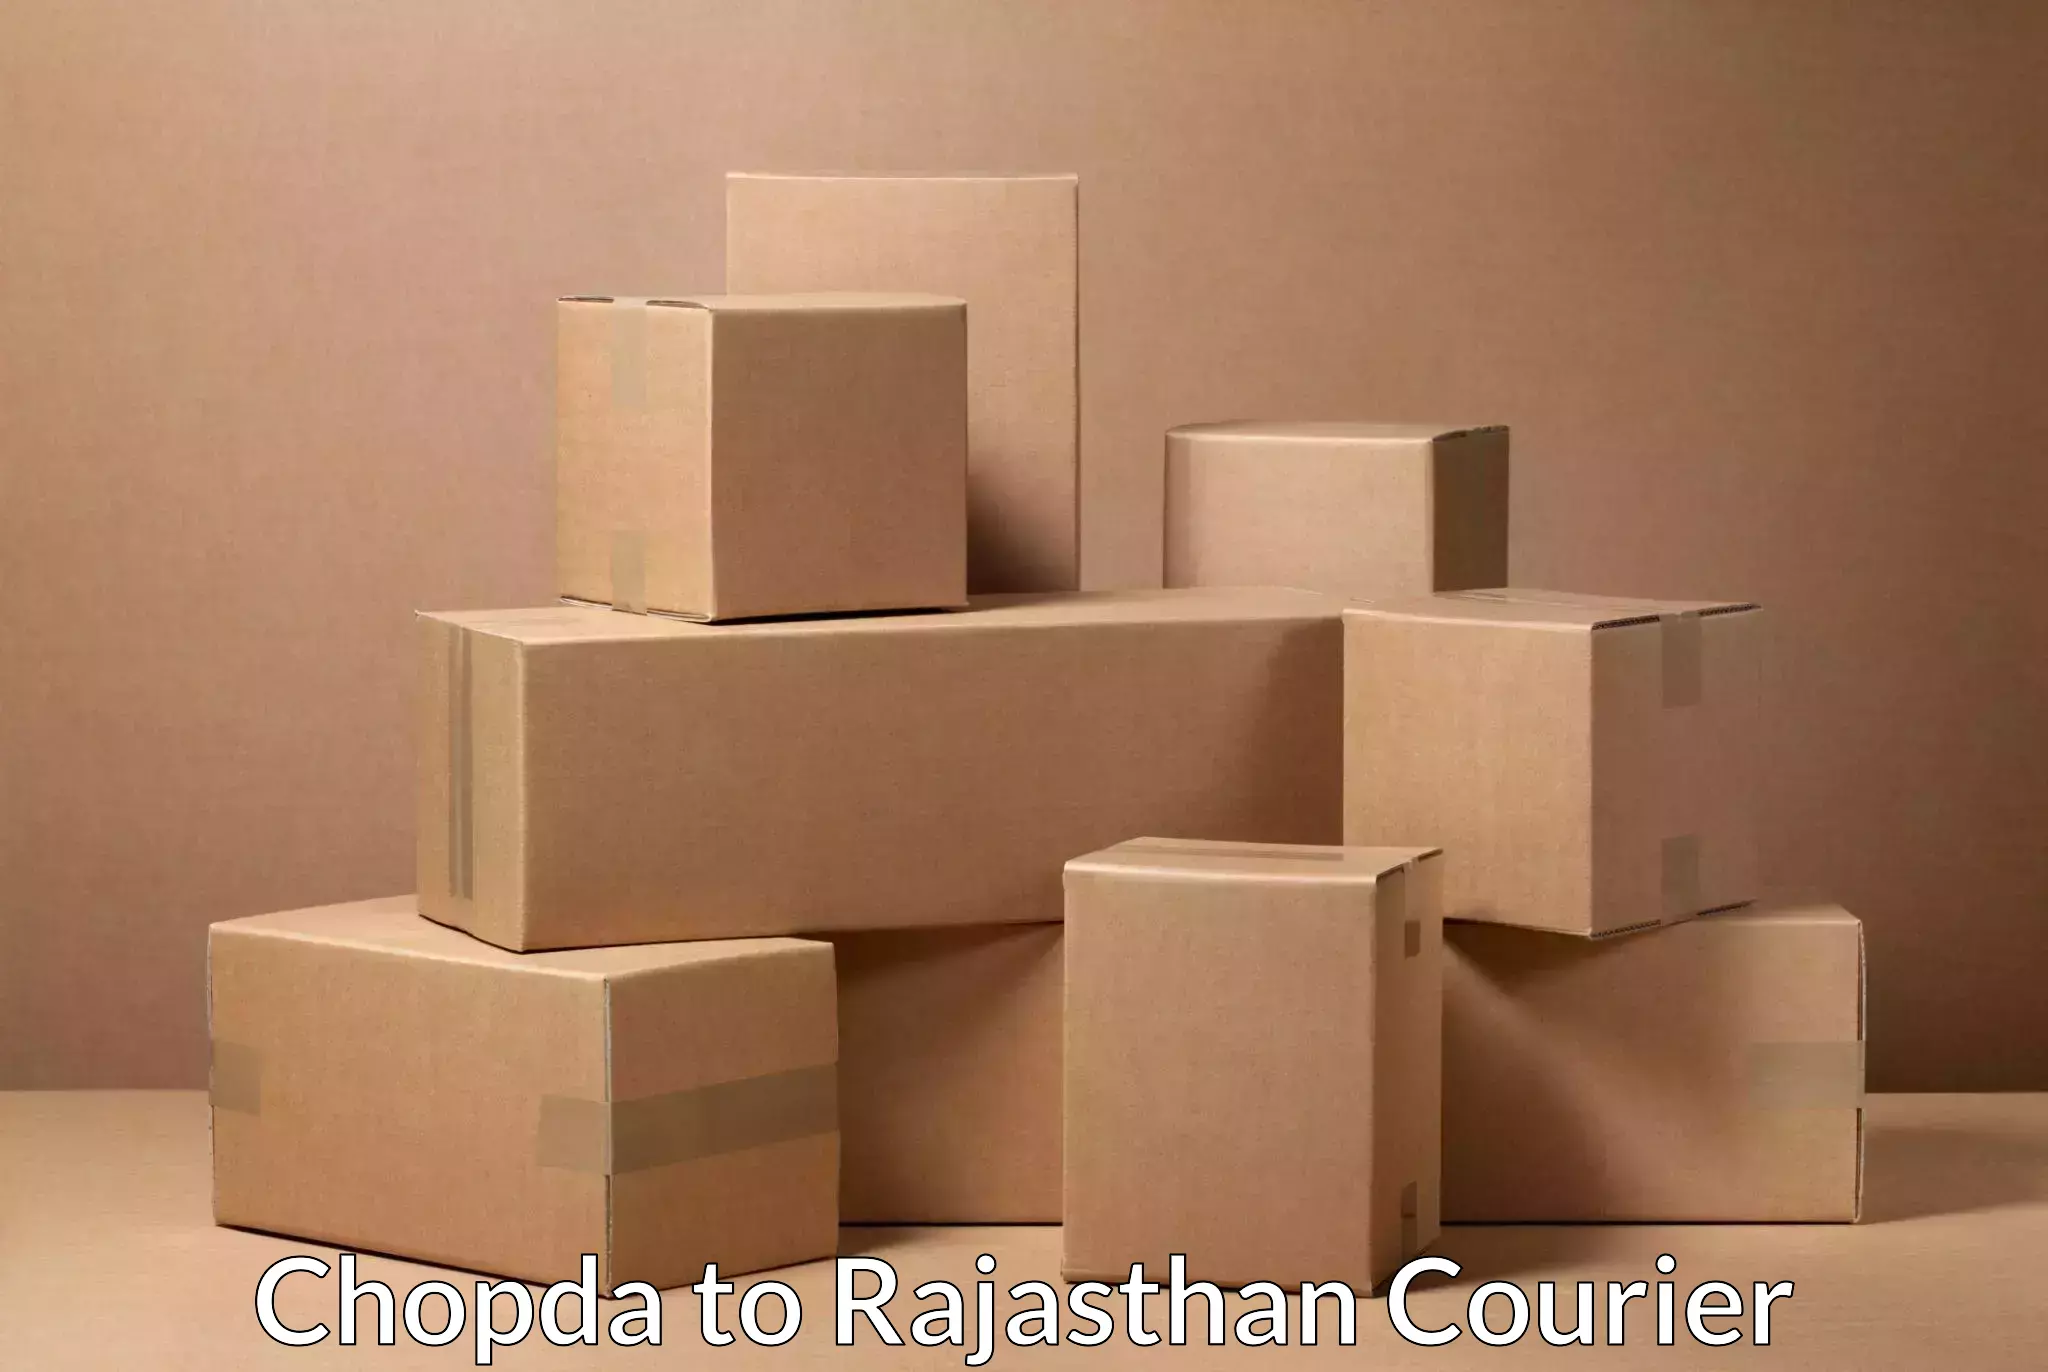 End-to-end delivery Chopda to Chittorgarh